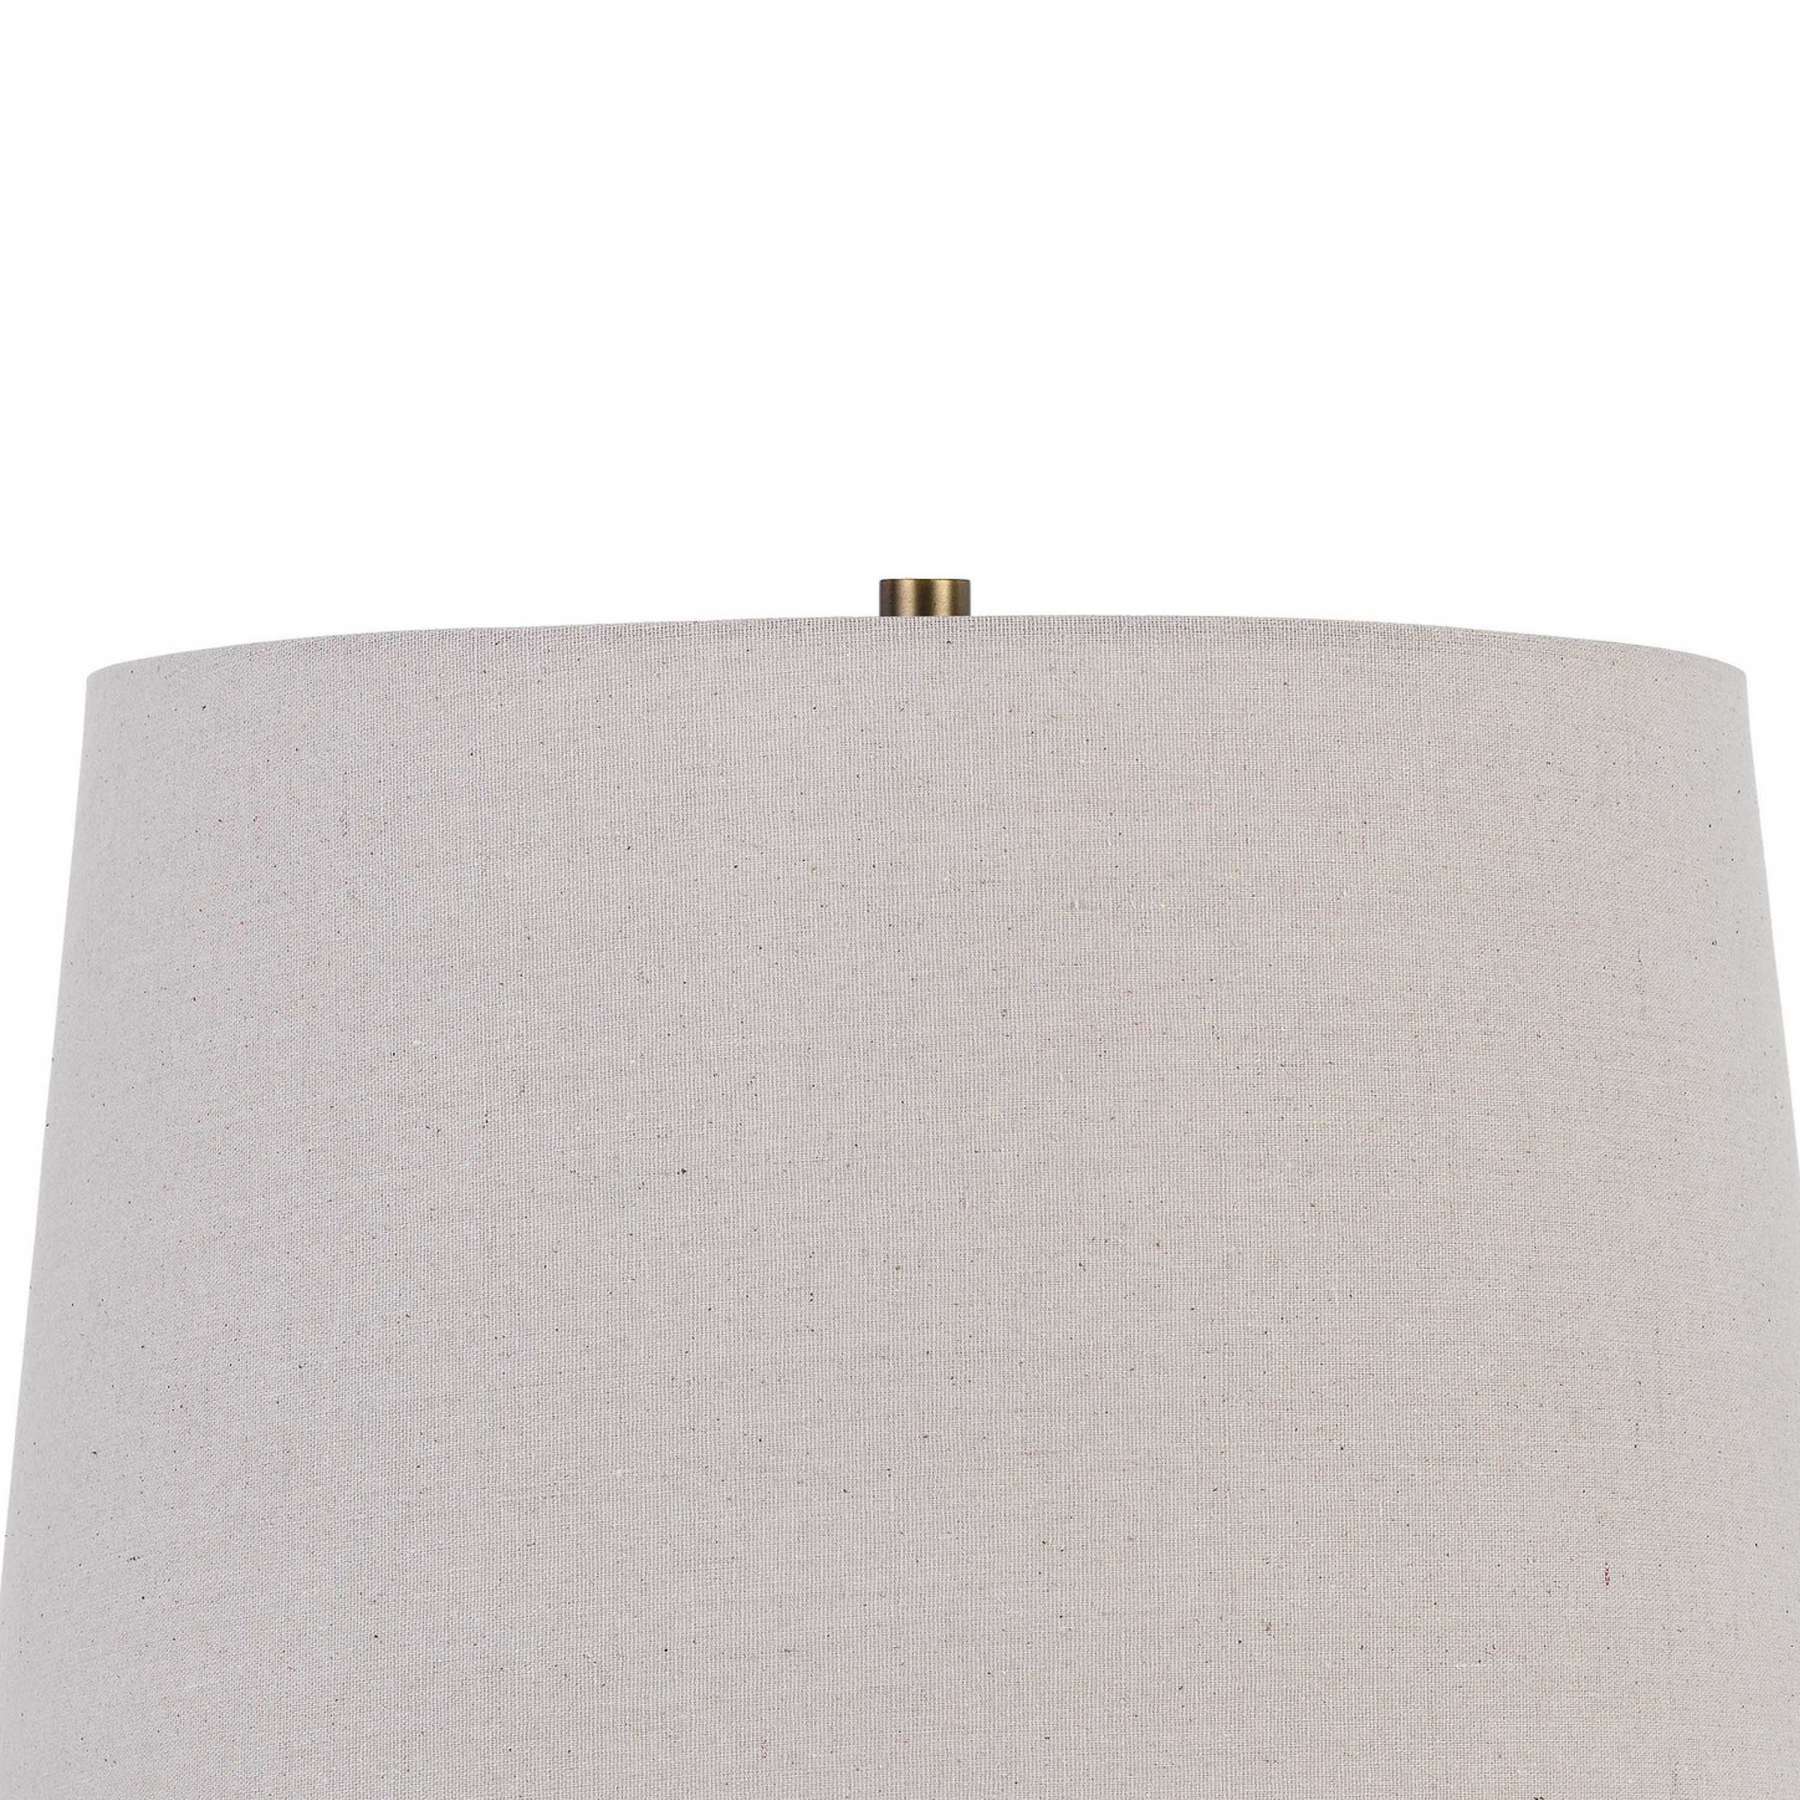 Metal Table Lamp With Cage Design Support With Round Base, White And Brass By Benzara